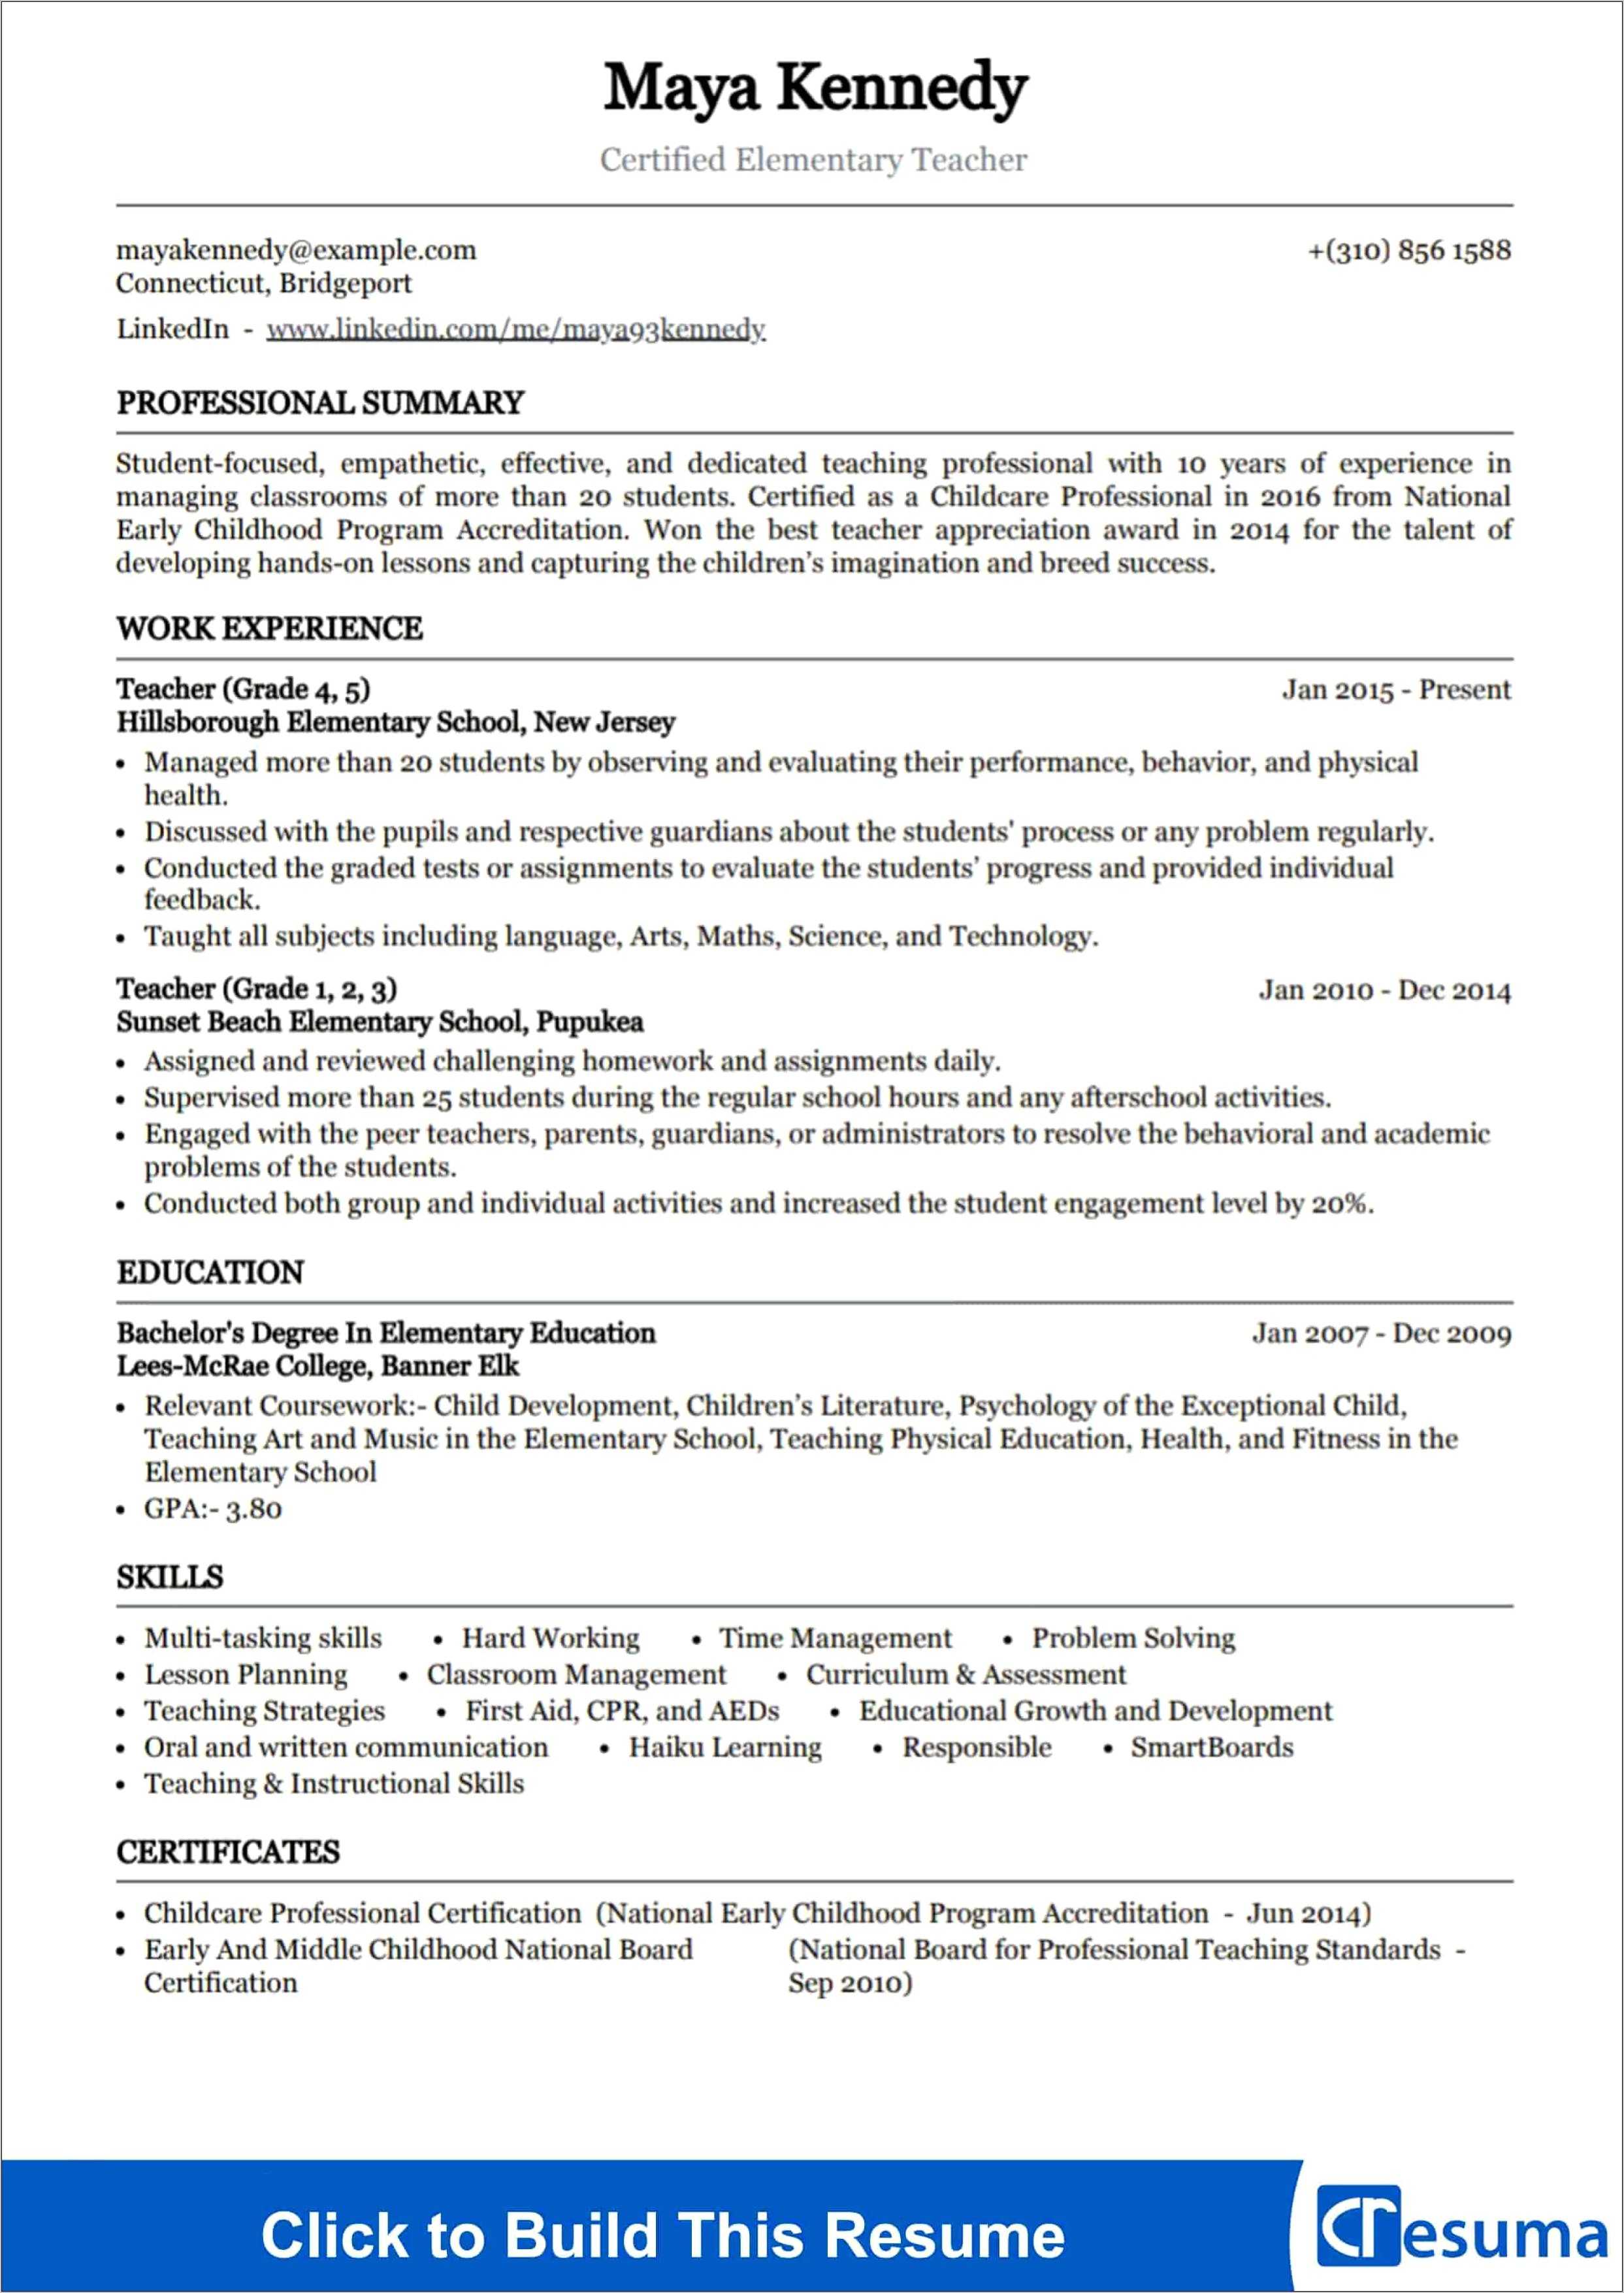 Sample Of Summary Of Skills For A Resume - Resume Example Gallery